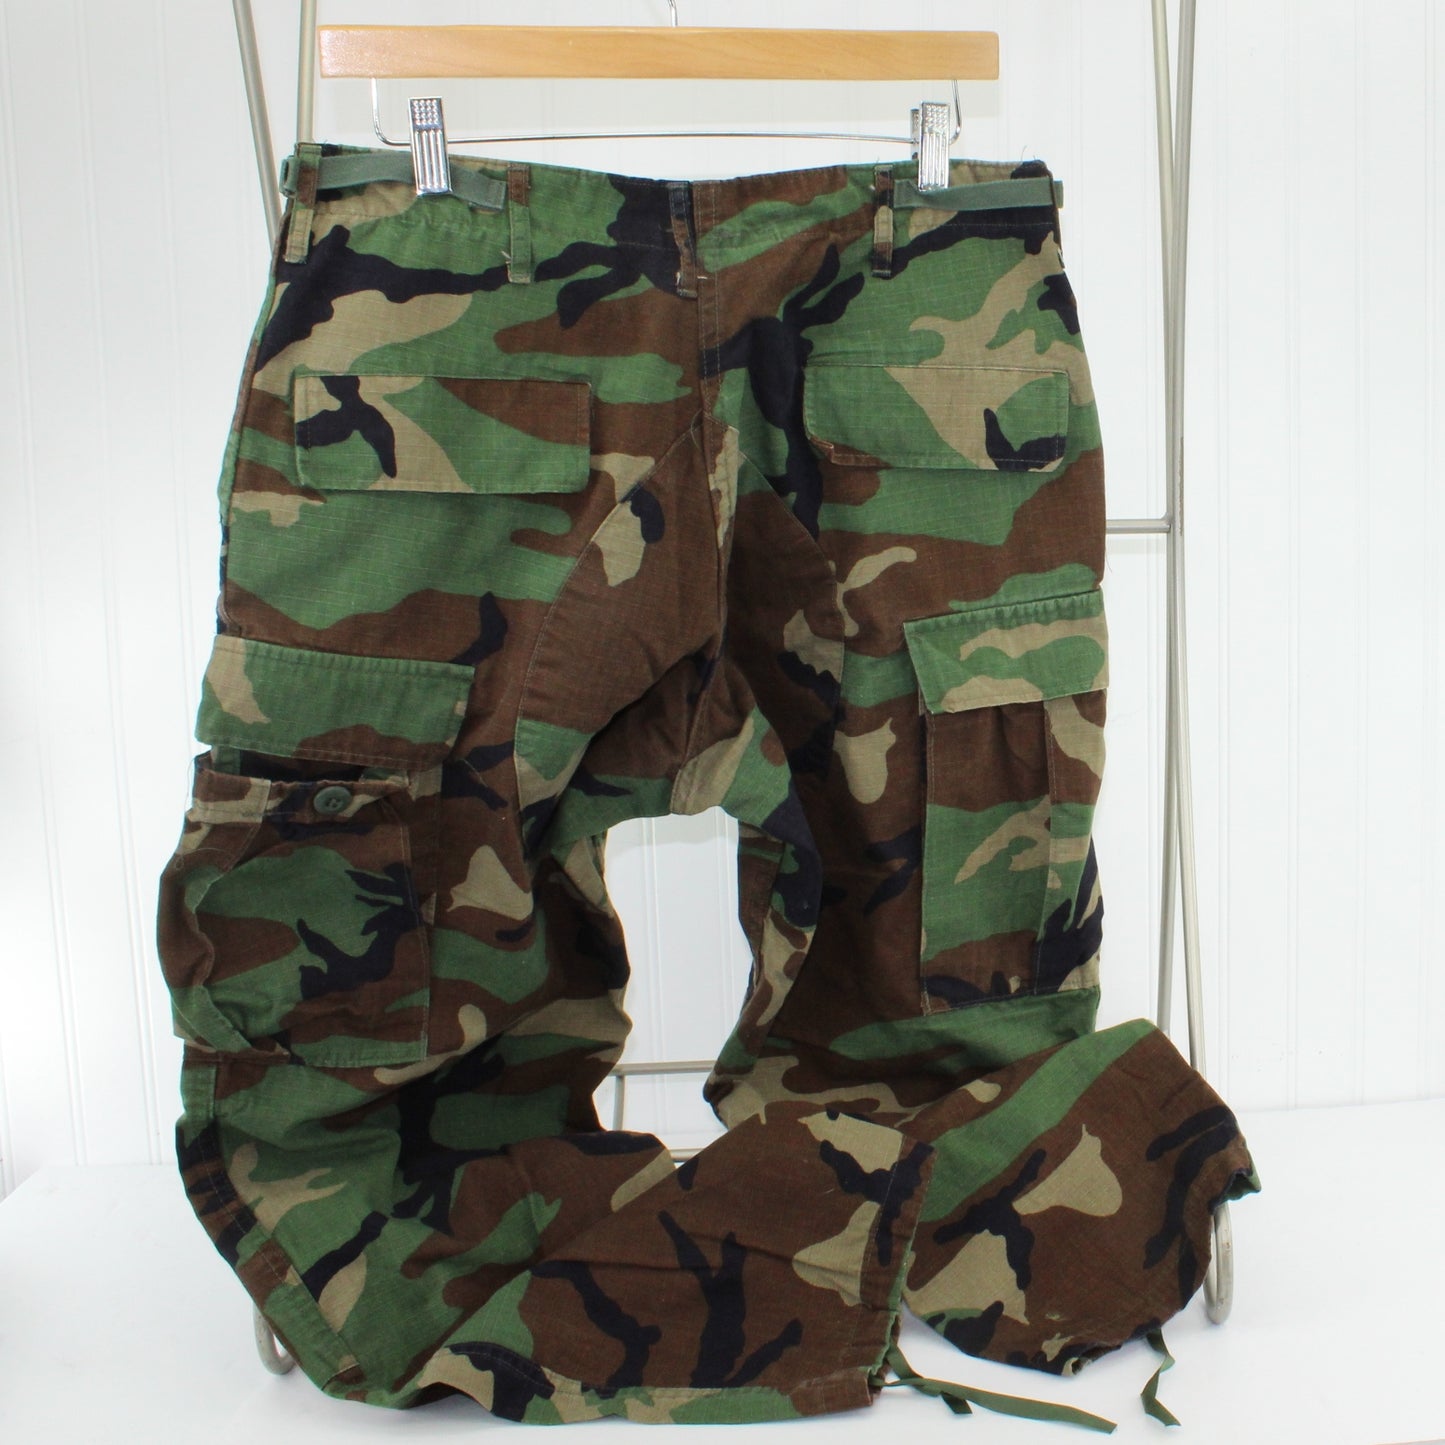 Propper 100% Cotton Camo Military Pants 6 Pockets Tie Leg M/R Adjust Waist Size hunting camping